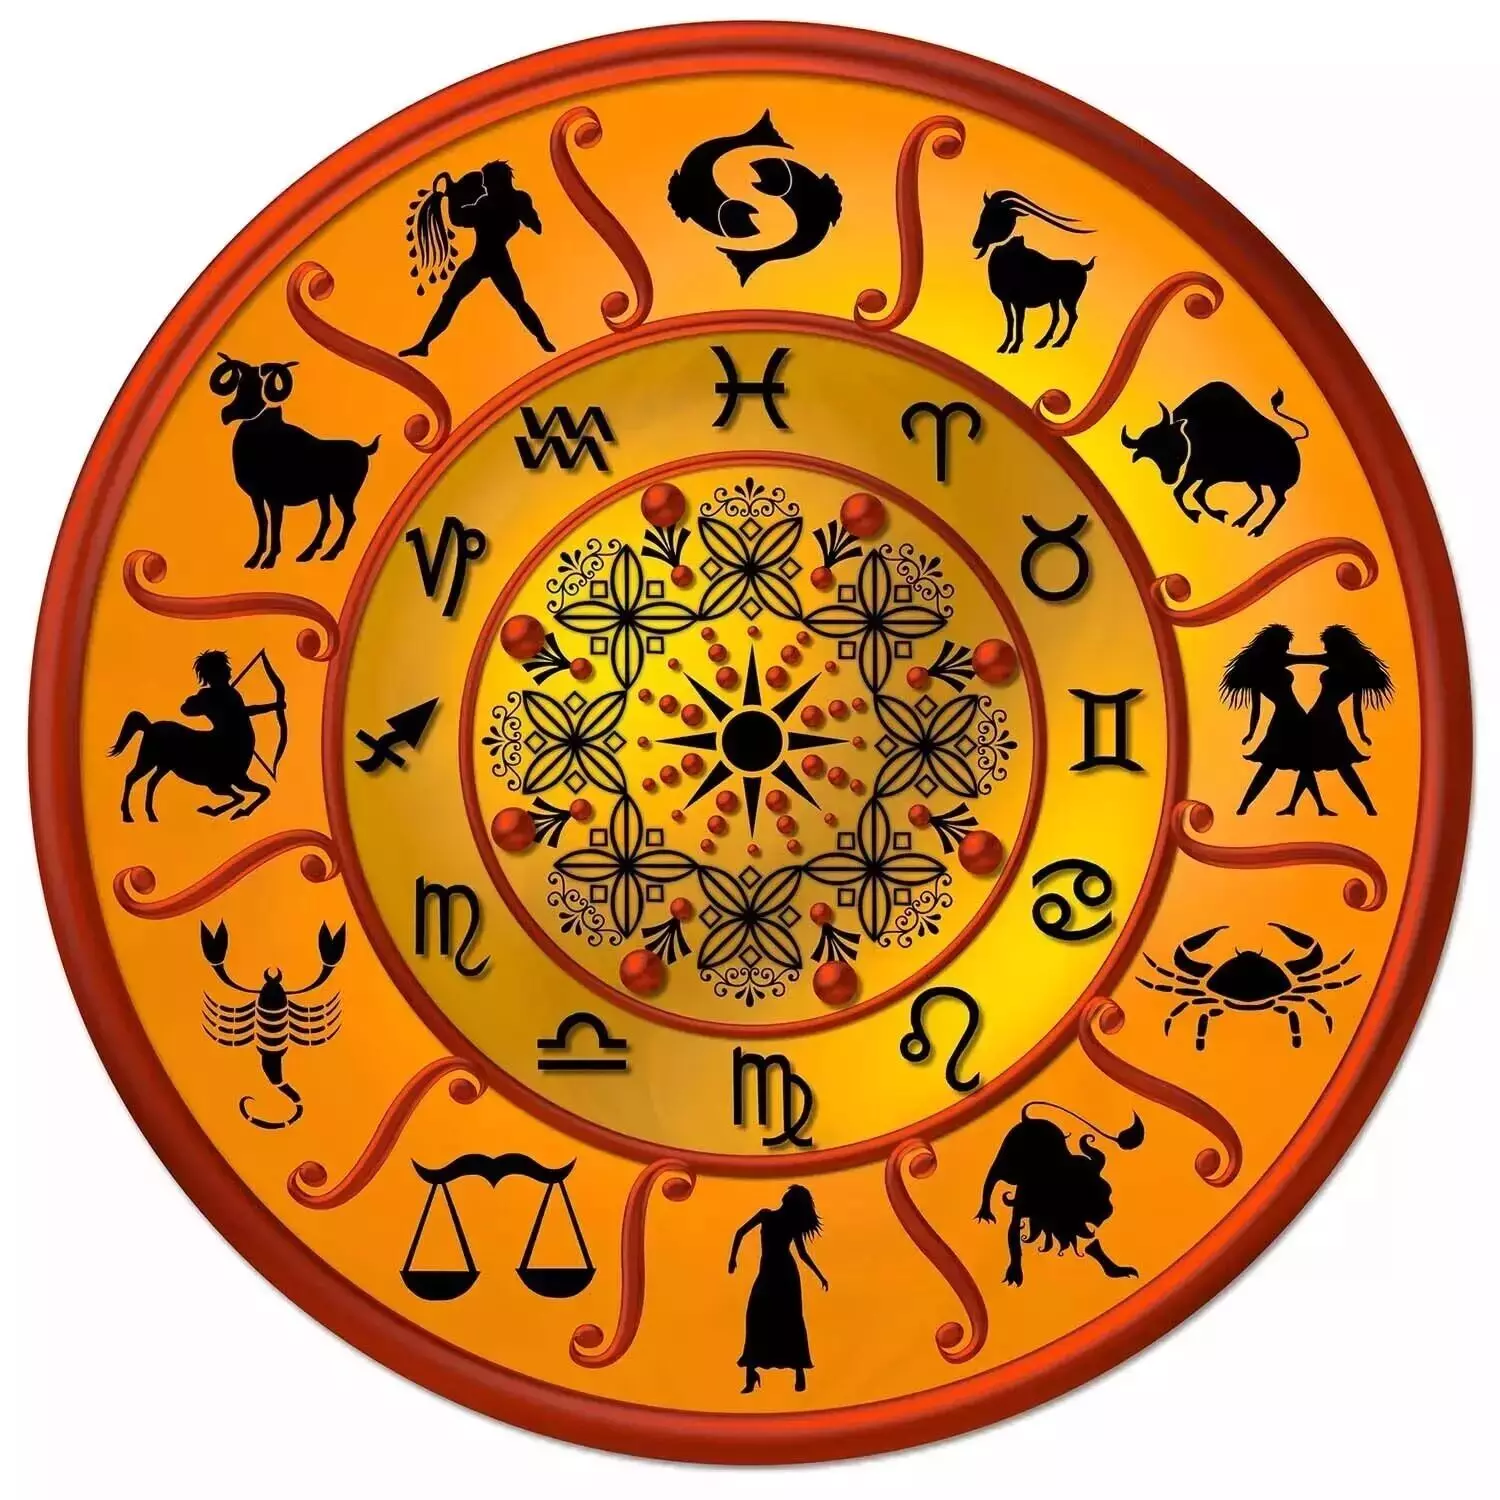 01  September – Know your todays horoscope